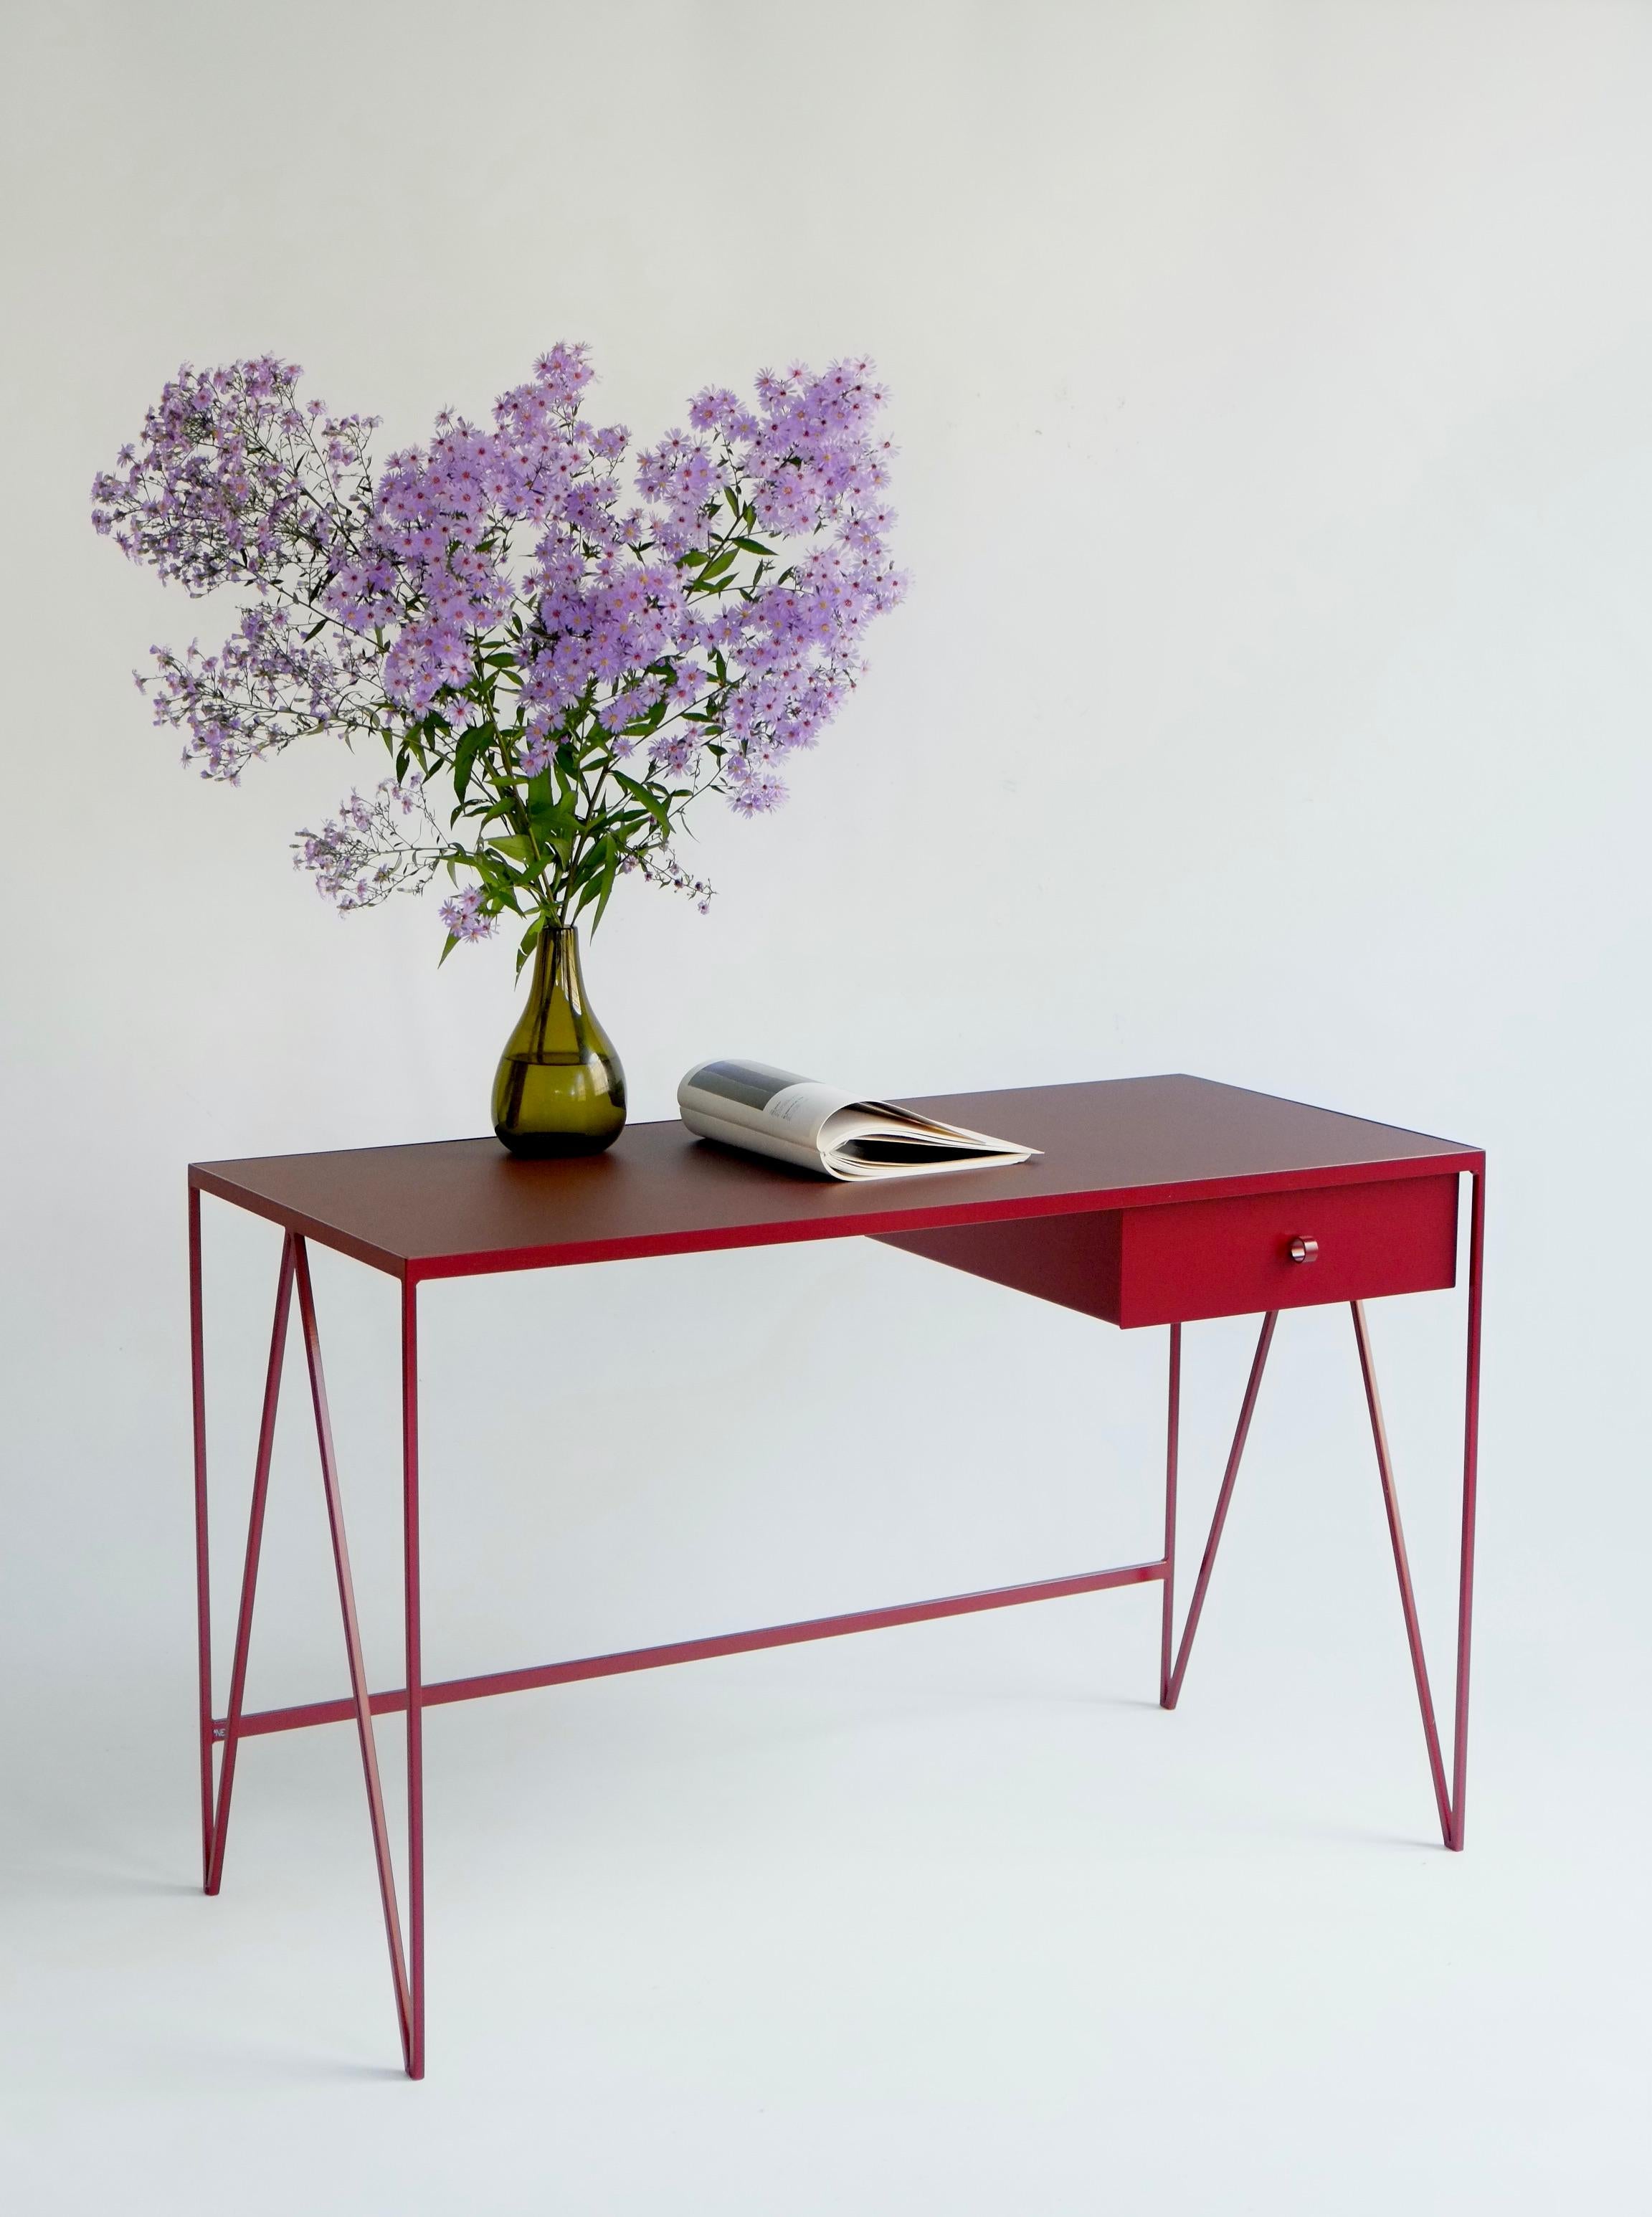 This study desk is made with a beetroot powder-coated steel frame and a burgundy coloured natural linoleum tabletop. The linoleum for our desks is selected for the ecological properties of the linseed of which it is made. It also has a smooth and